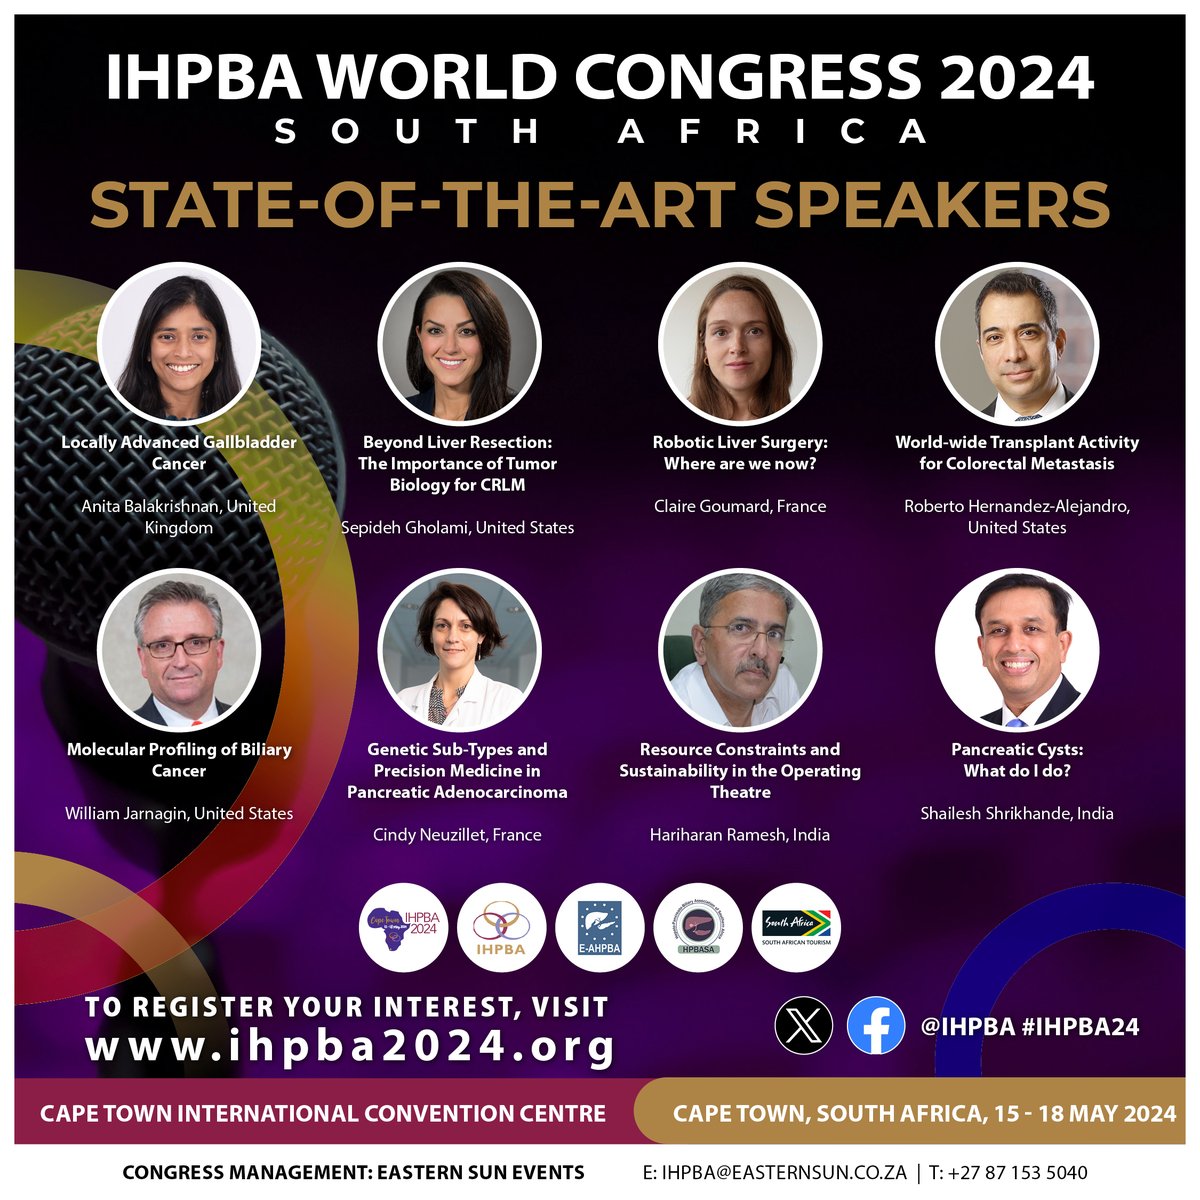 Introducing our exceptional lineup of State-of-the-Art Speakers set to deliver exclusive talks on the latest groundbreaking subjects at #IHPBA24 in Cape Town, 15-18 May 2024. Visit our website ihpba2024.org. Early registration opens on 16th October 2023 @EAHPBA @AHPBA